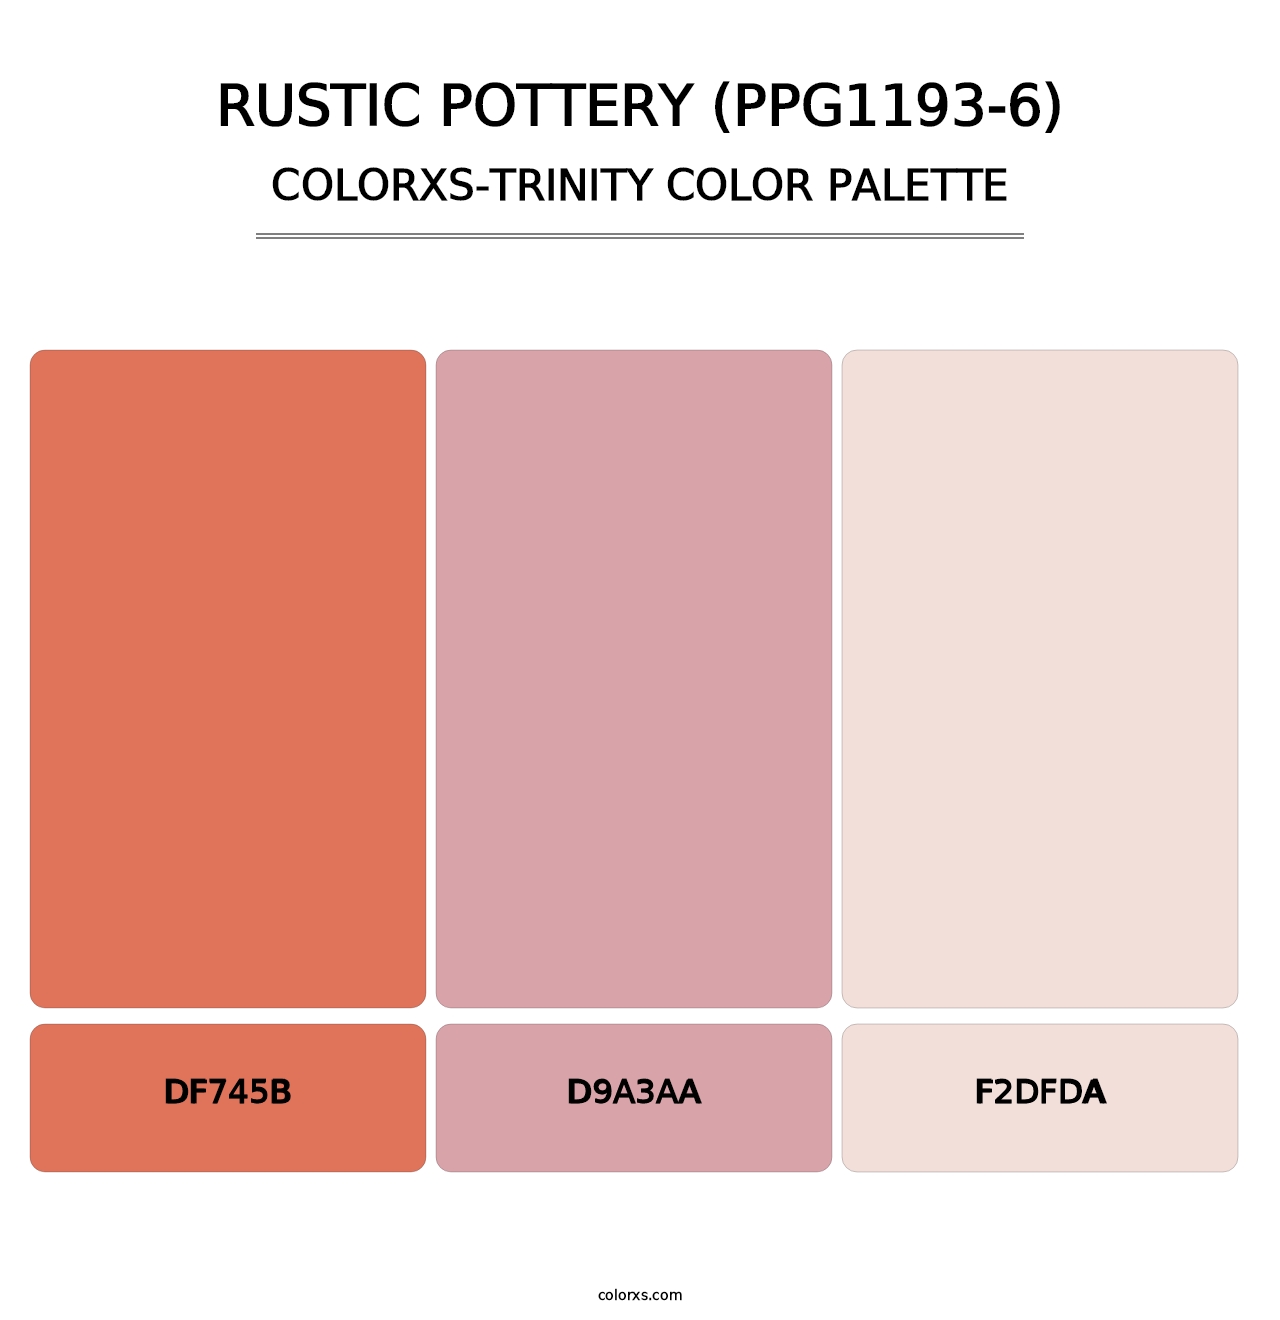 Rustic Pottery (PPG1193-6) - Colorxs Trinity Palette